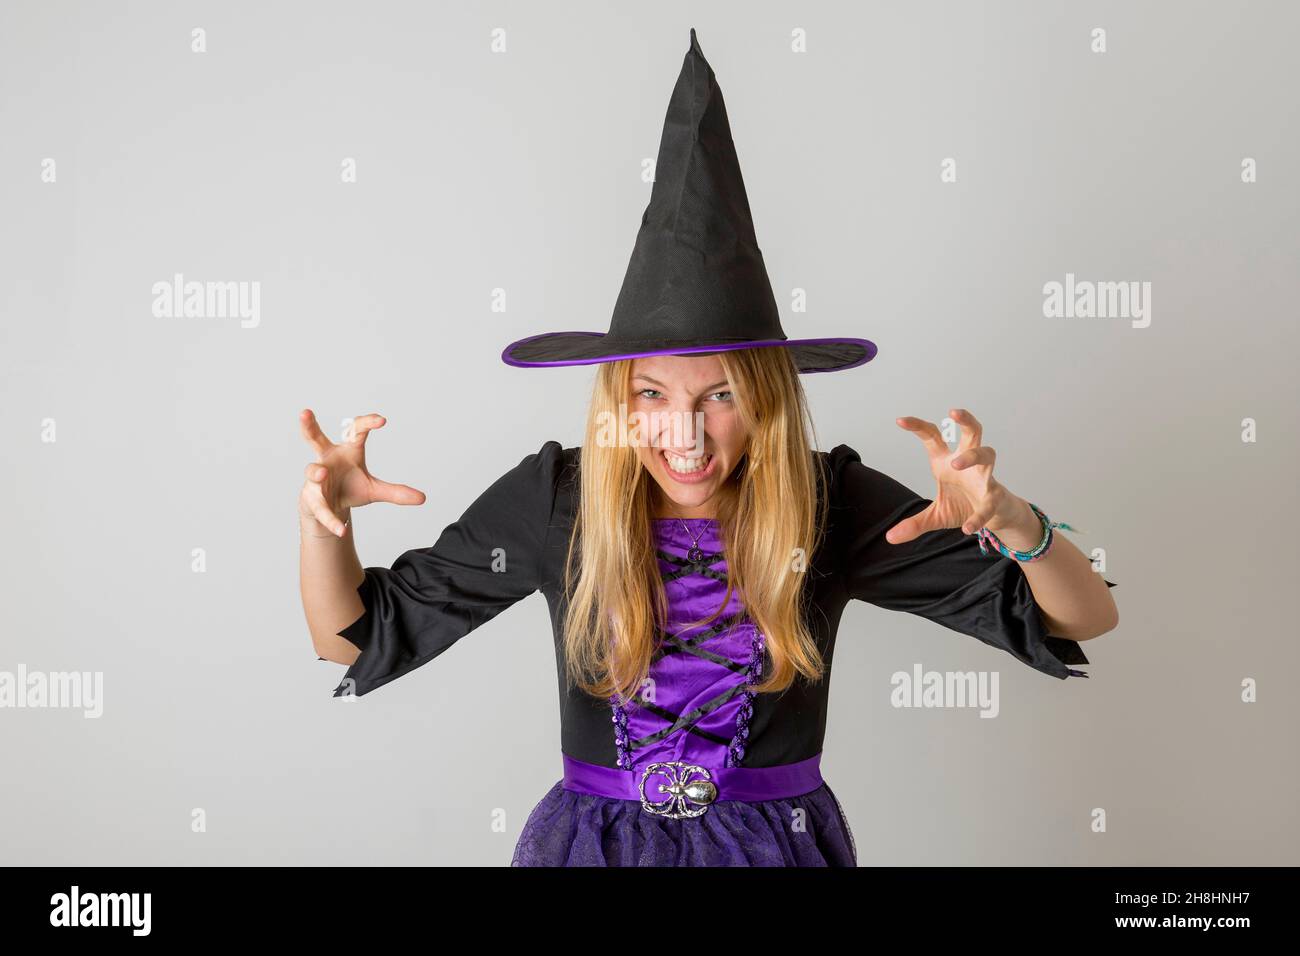 France, Paris, Halloween, young girl in witch costume Stock Photo - Alamy